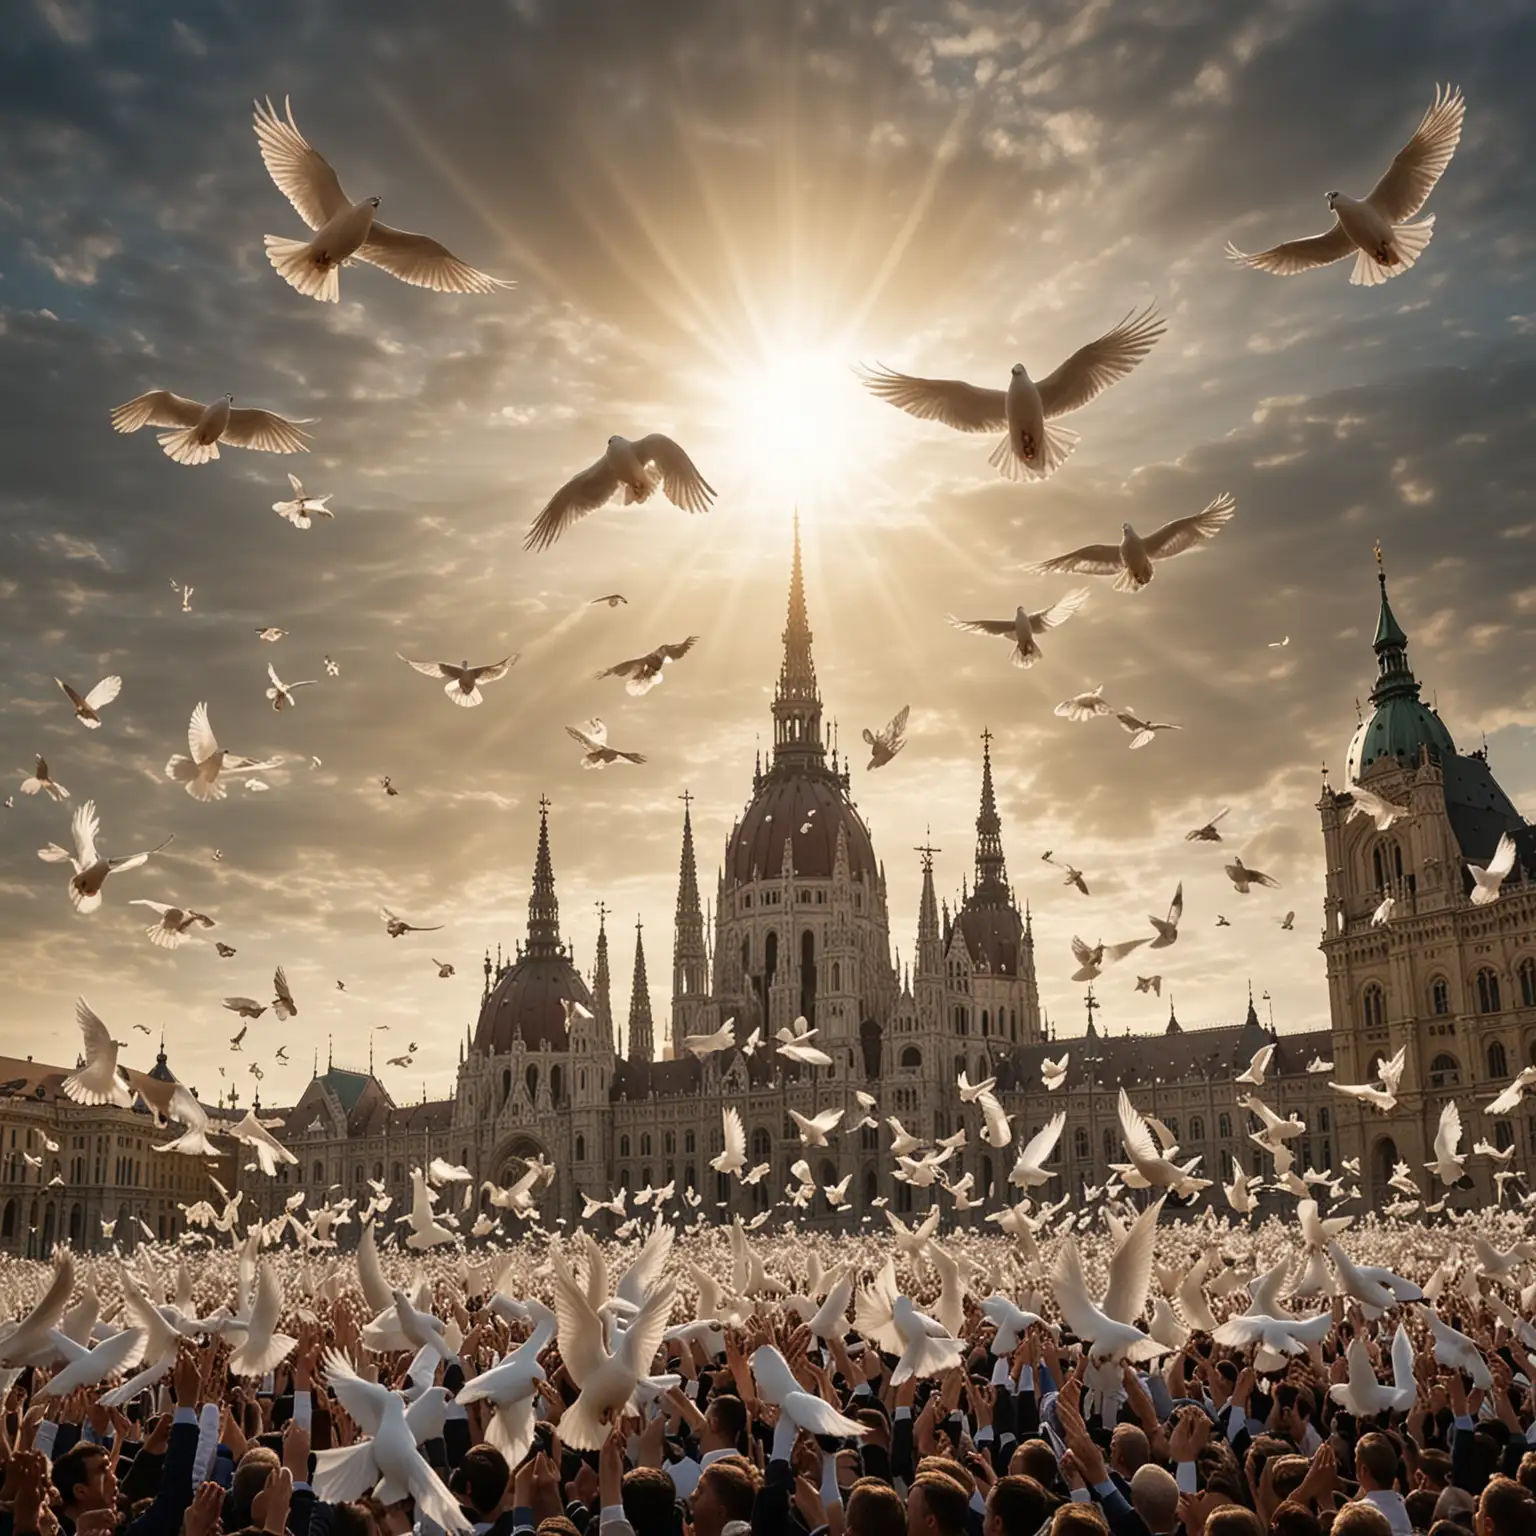 Orbn Viktor Releases Peaceful Doves in Front of Parliament